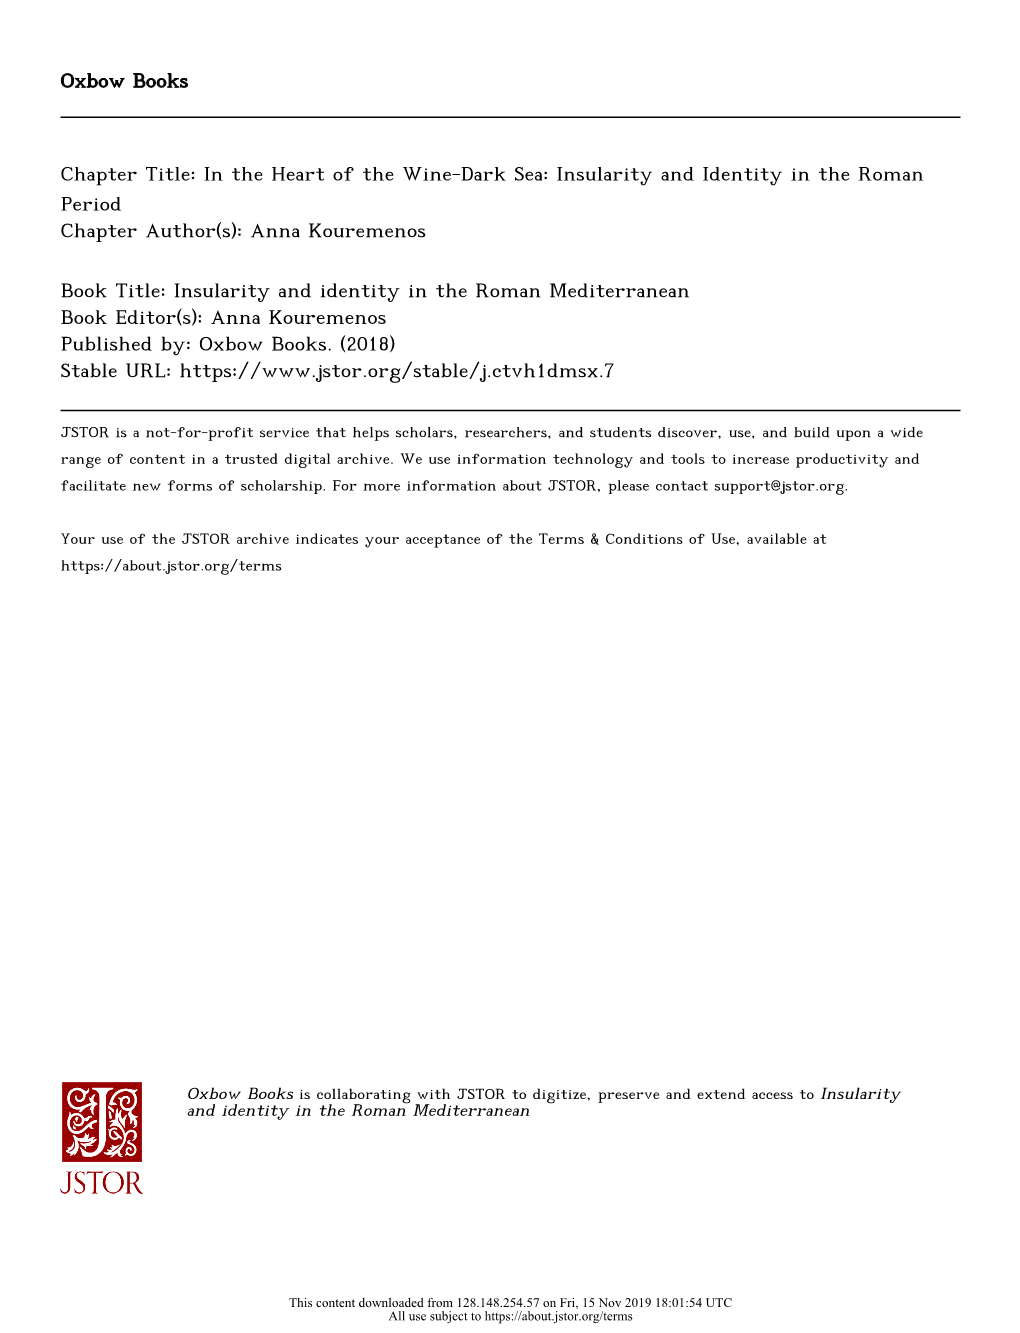 Insularity and Identity in the Roman Period Chapter Author(S): Anna Kouremenos